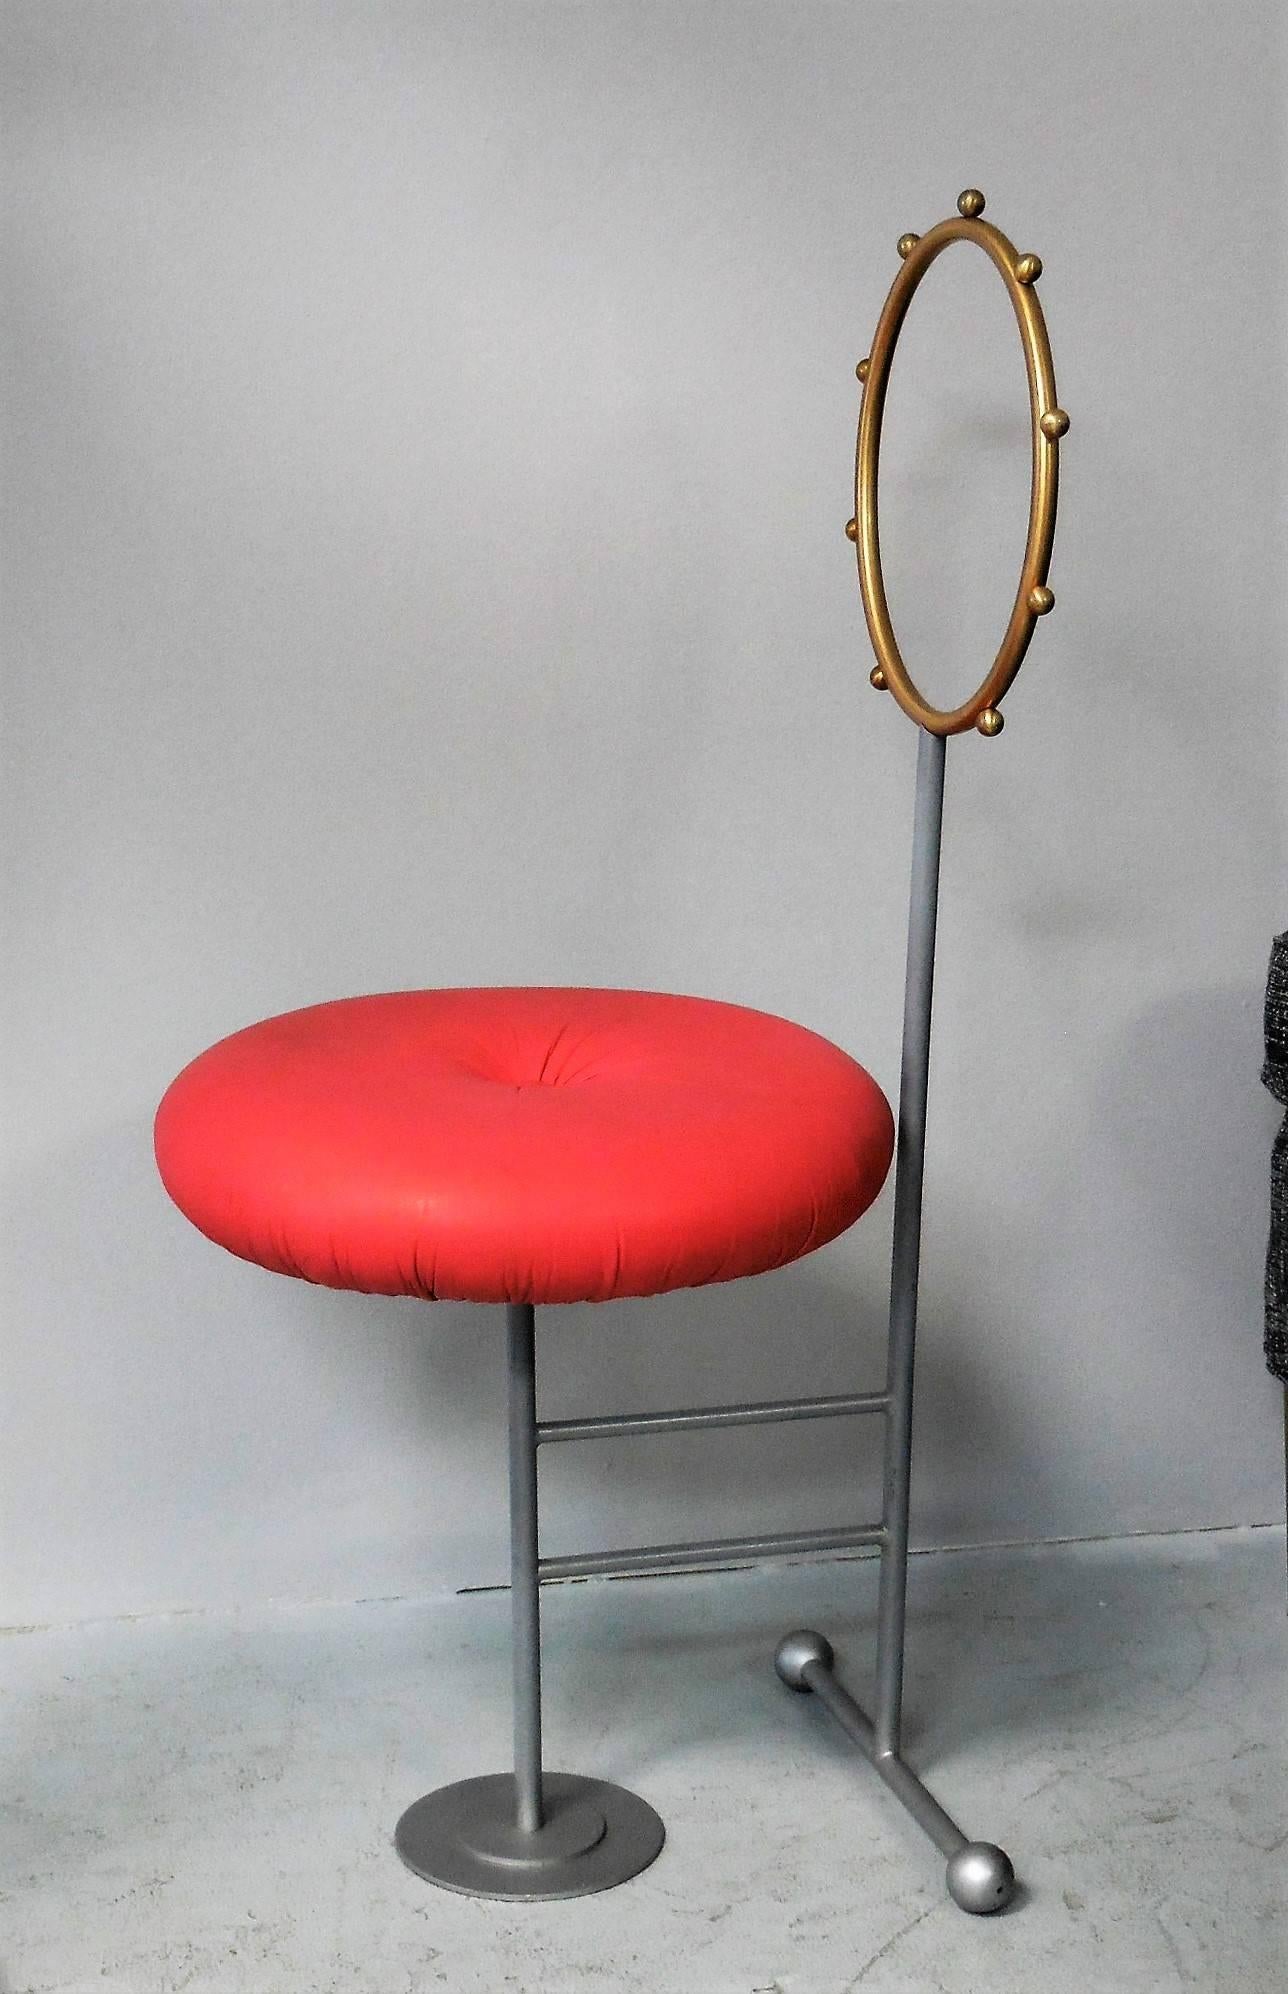 Most interesting chairs around. Brass halo backs rest on the unique enameled frames that also support the leather upholstered seats. Quite eye catching that add an unexpected edge to any room.